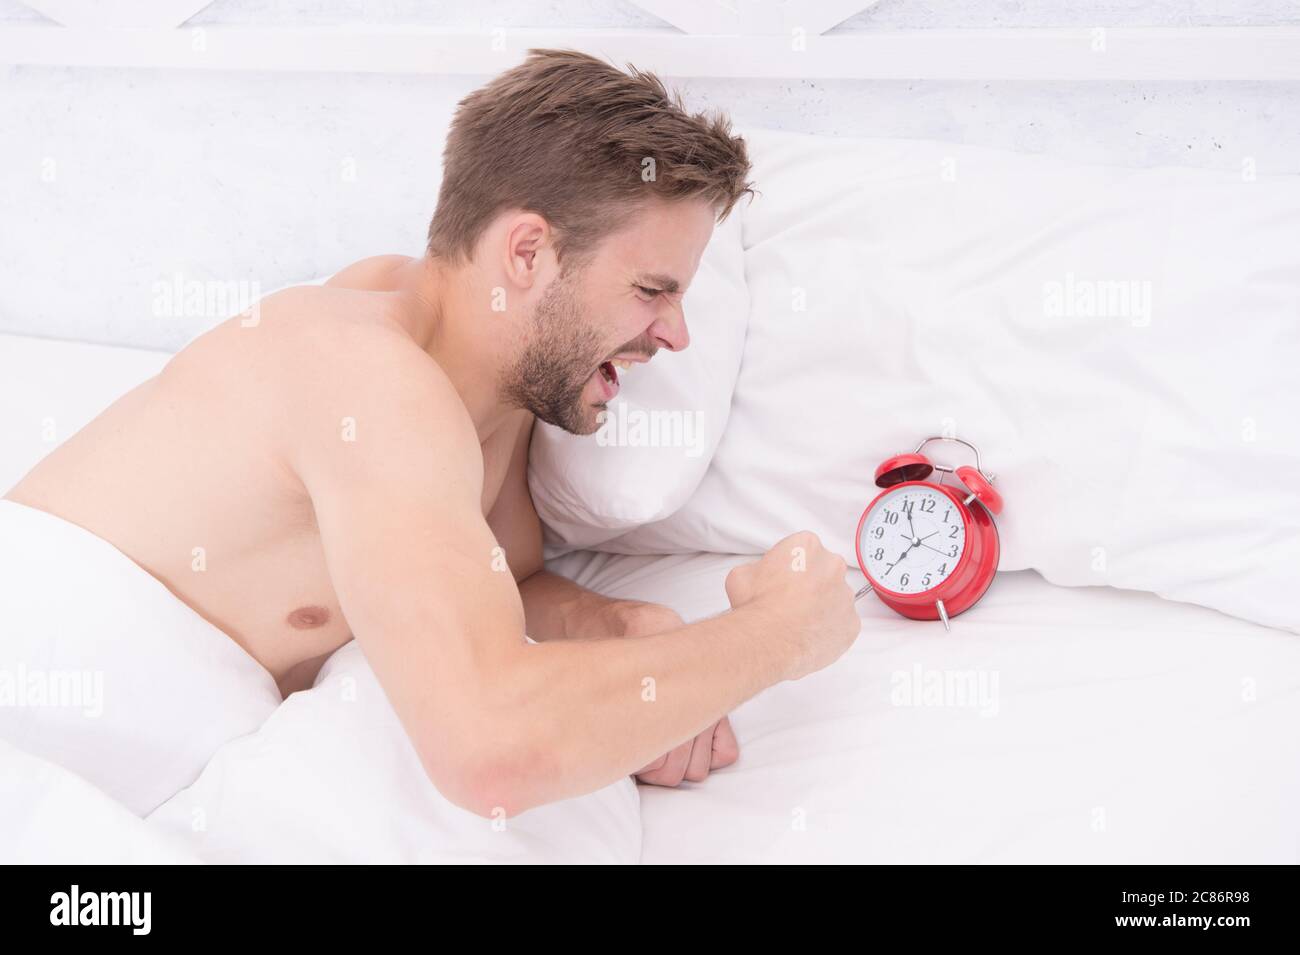 He is late. Angry guy break alarm clock in bed. Unshaven man awake from sleep. Keeping late hours. Wake timer. Wakeup time. Morning stress. Being late again. Stock Photo